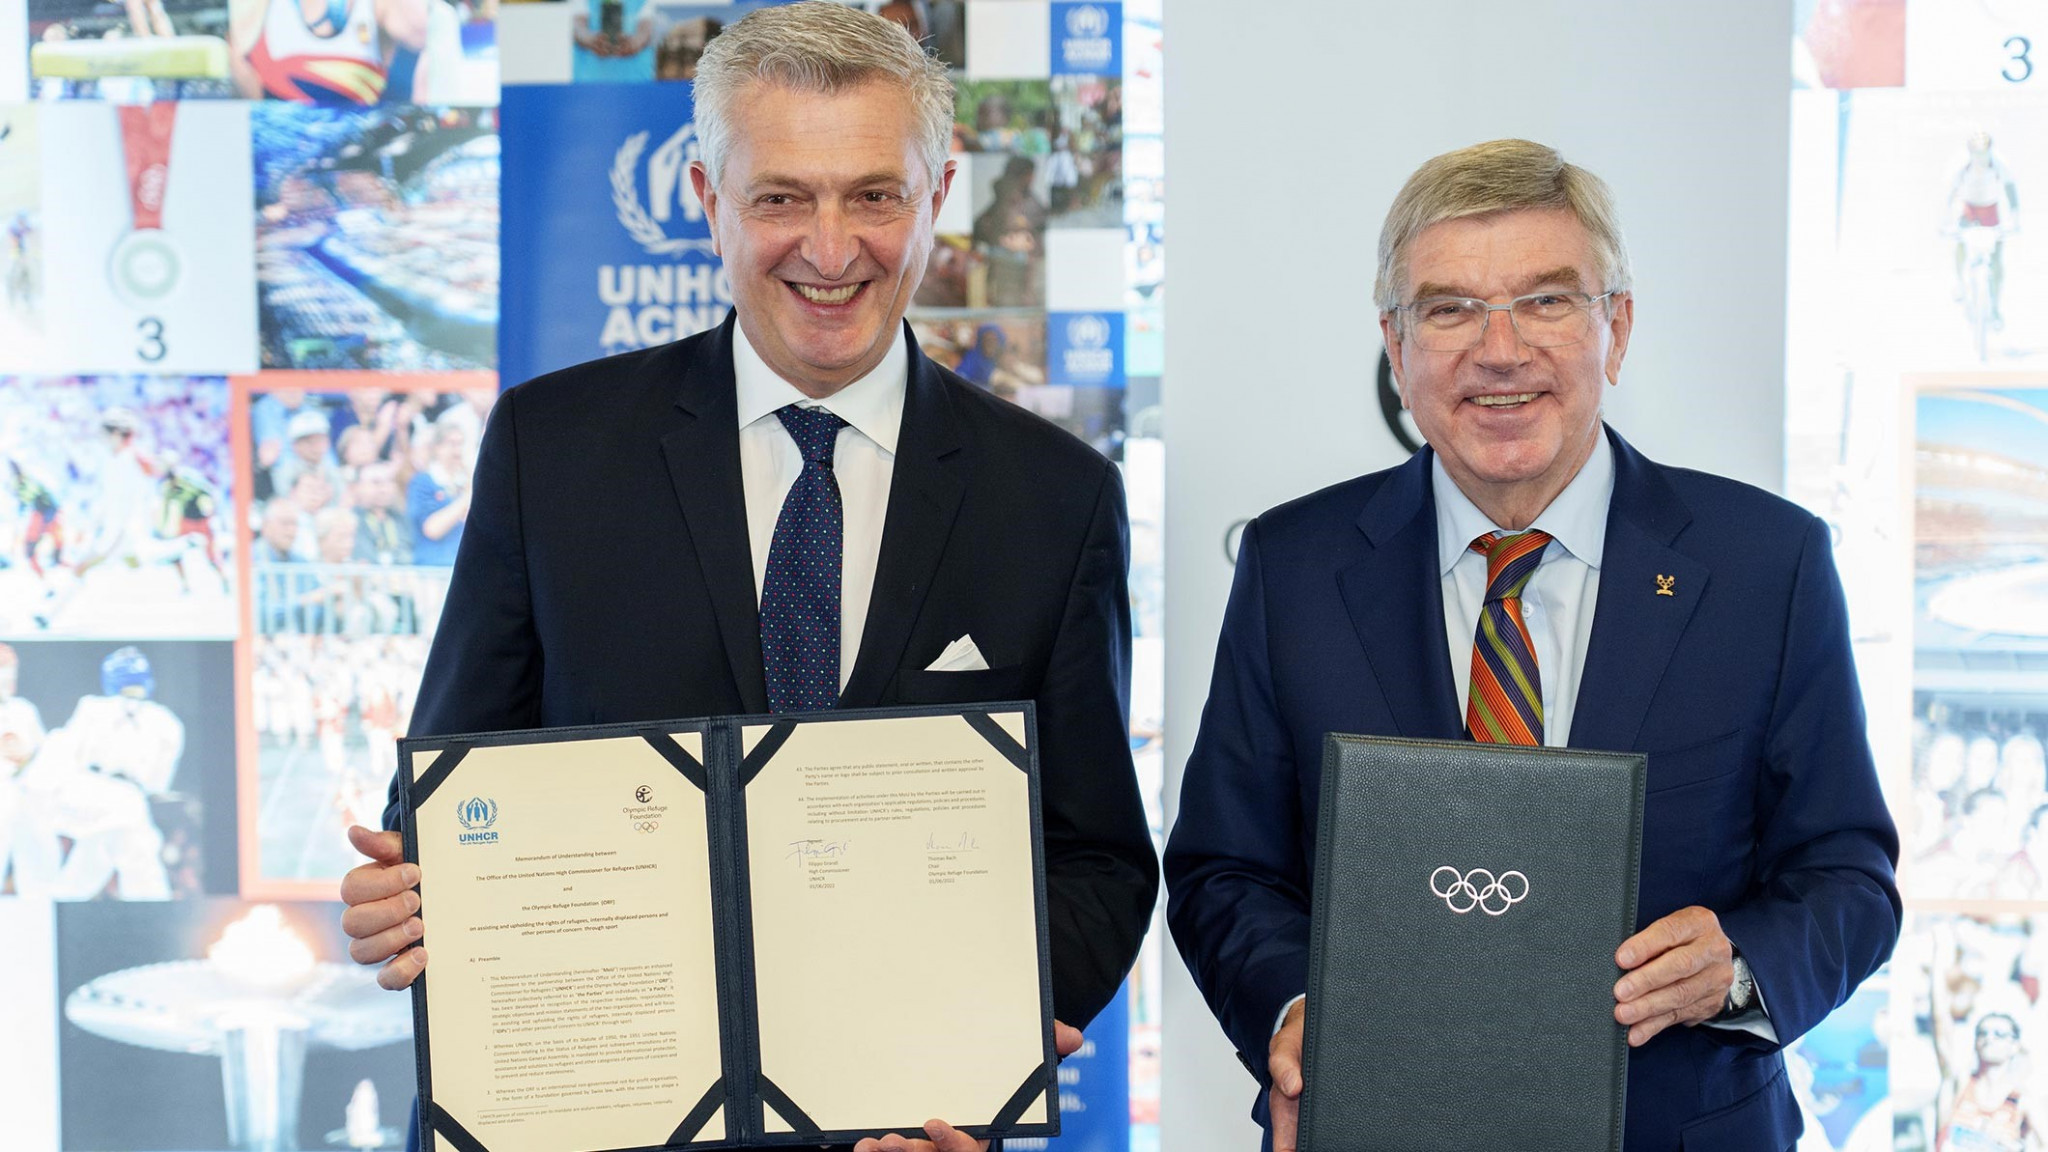 Olympic Refuge Foundation signs new agreement with UN Refugee Agency and plans initiative in Ukraine